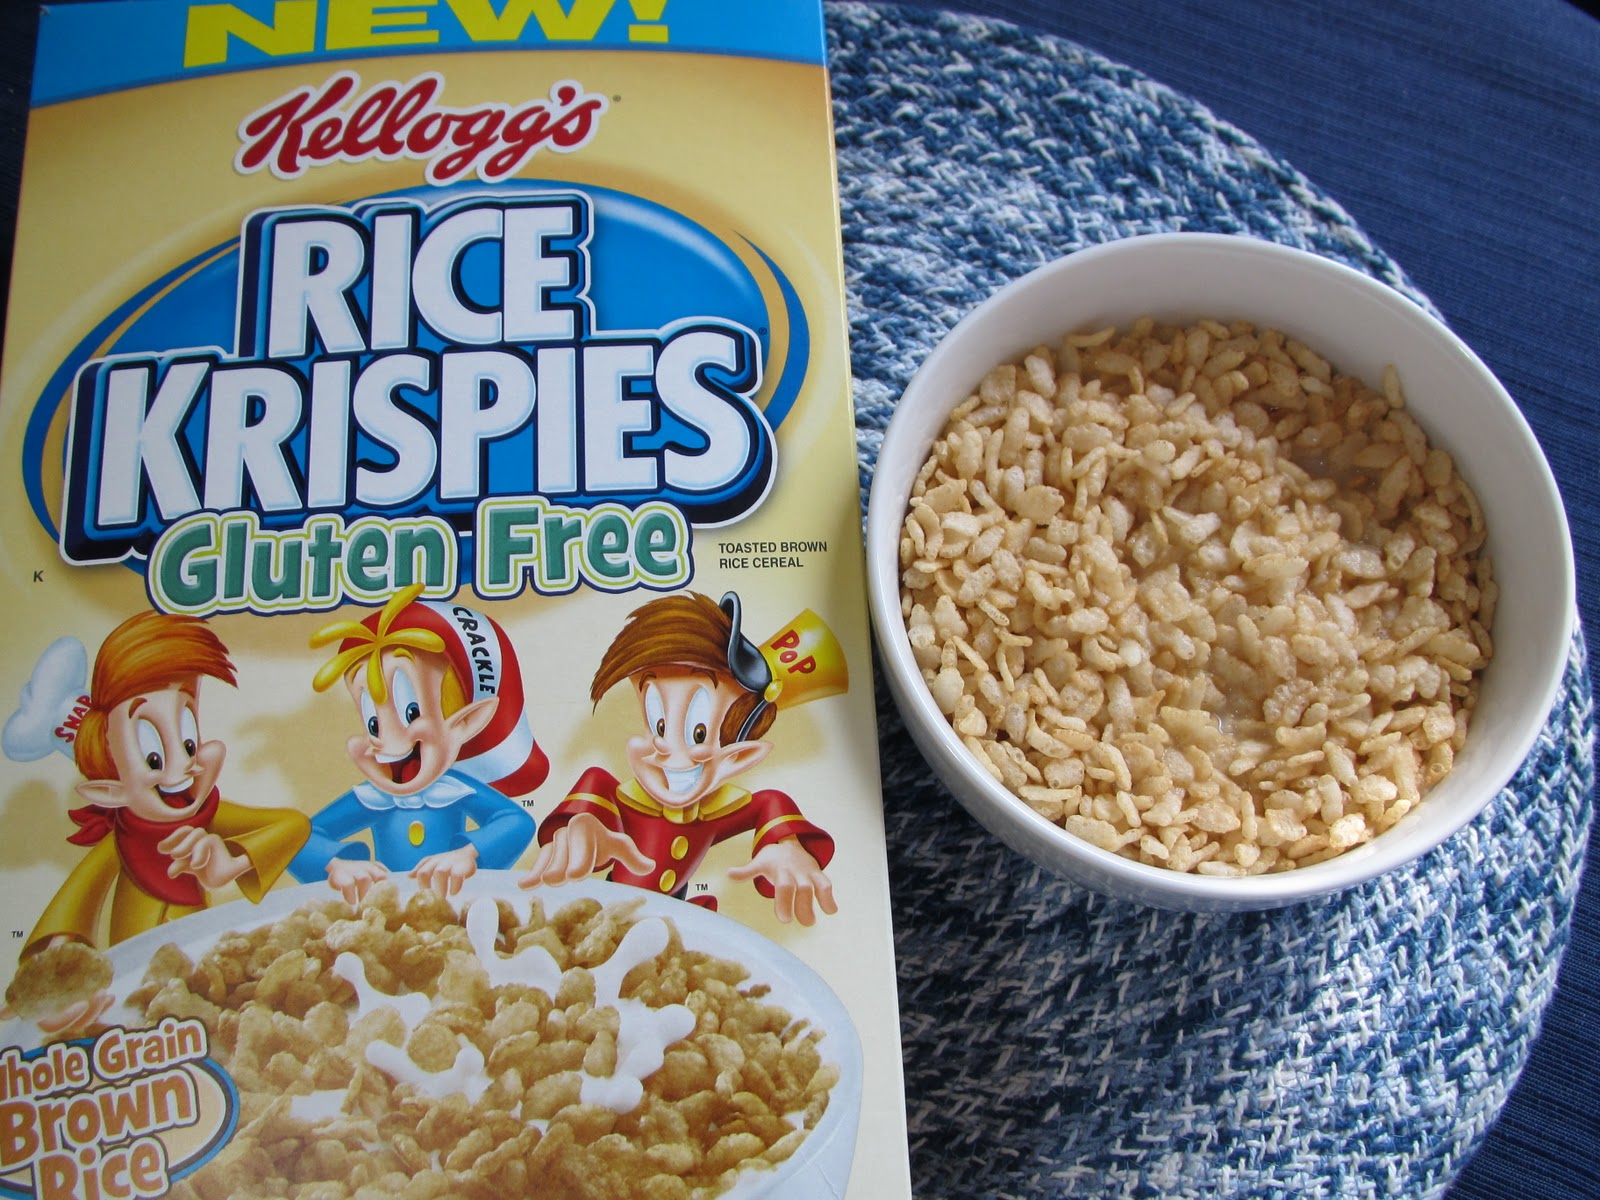 Product Review: Gluten Free Rice Krispies and Rice Krispies Treats